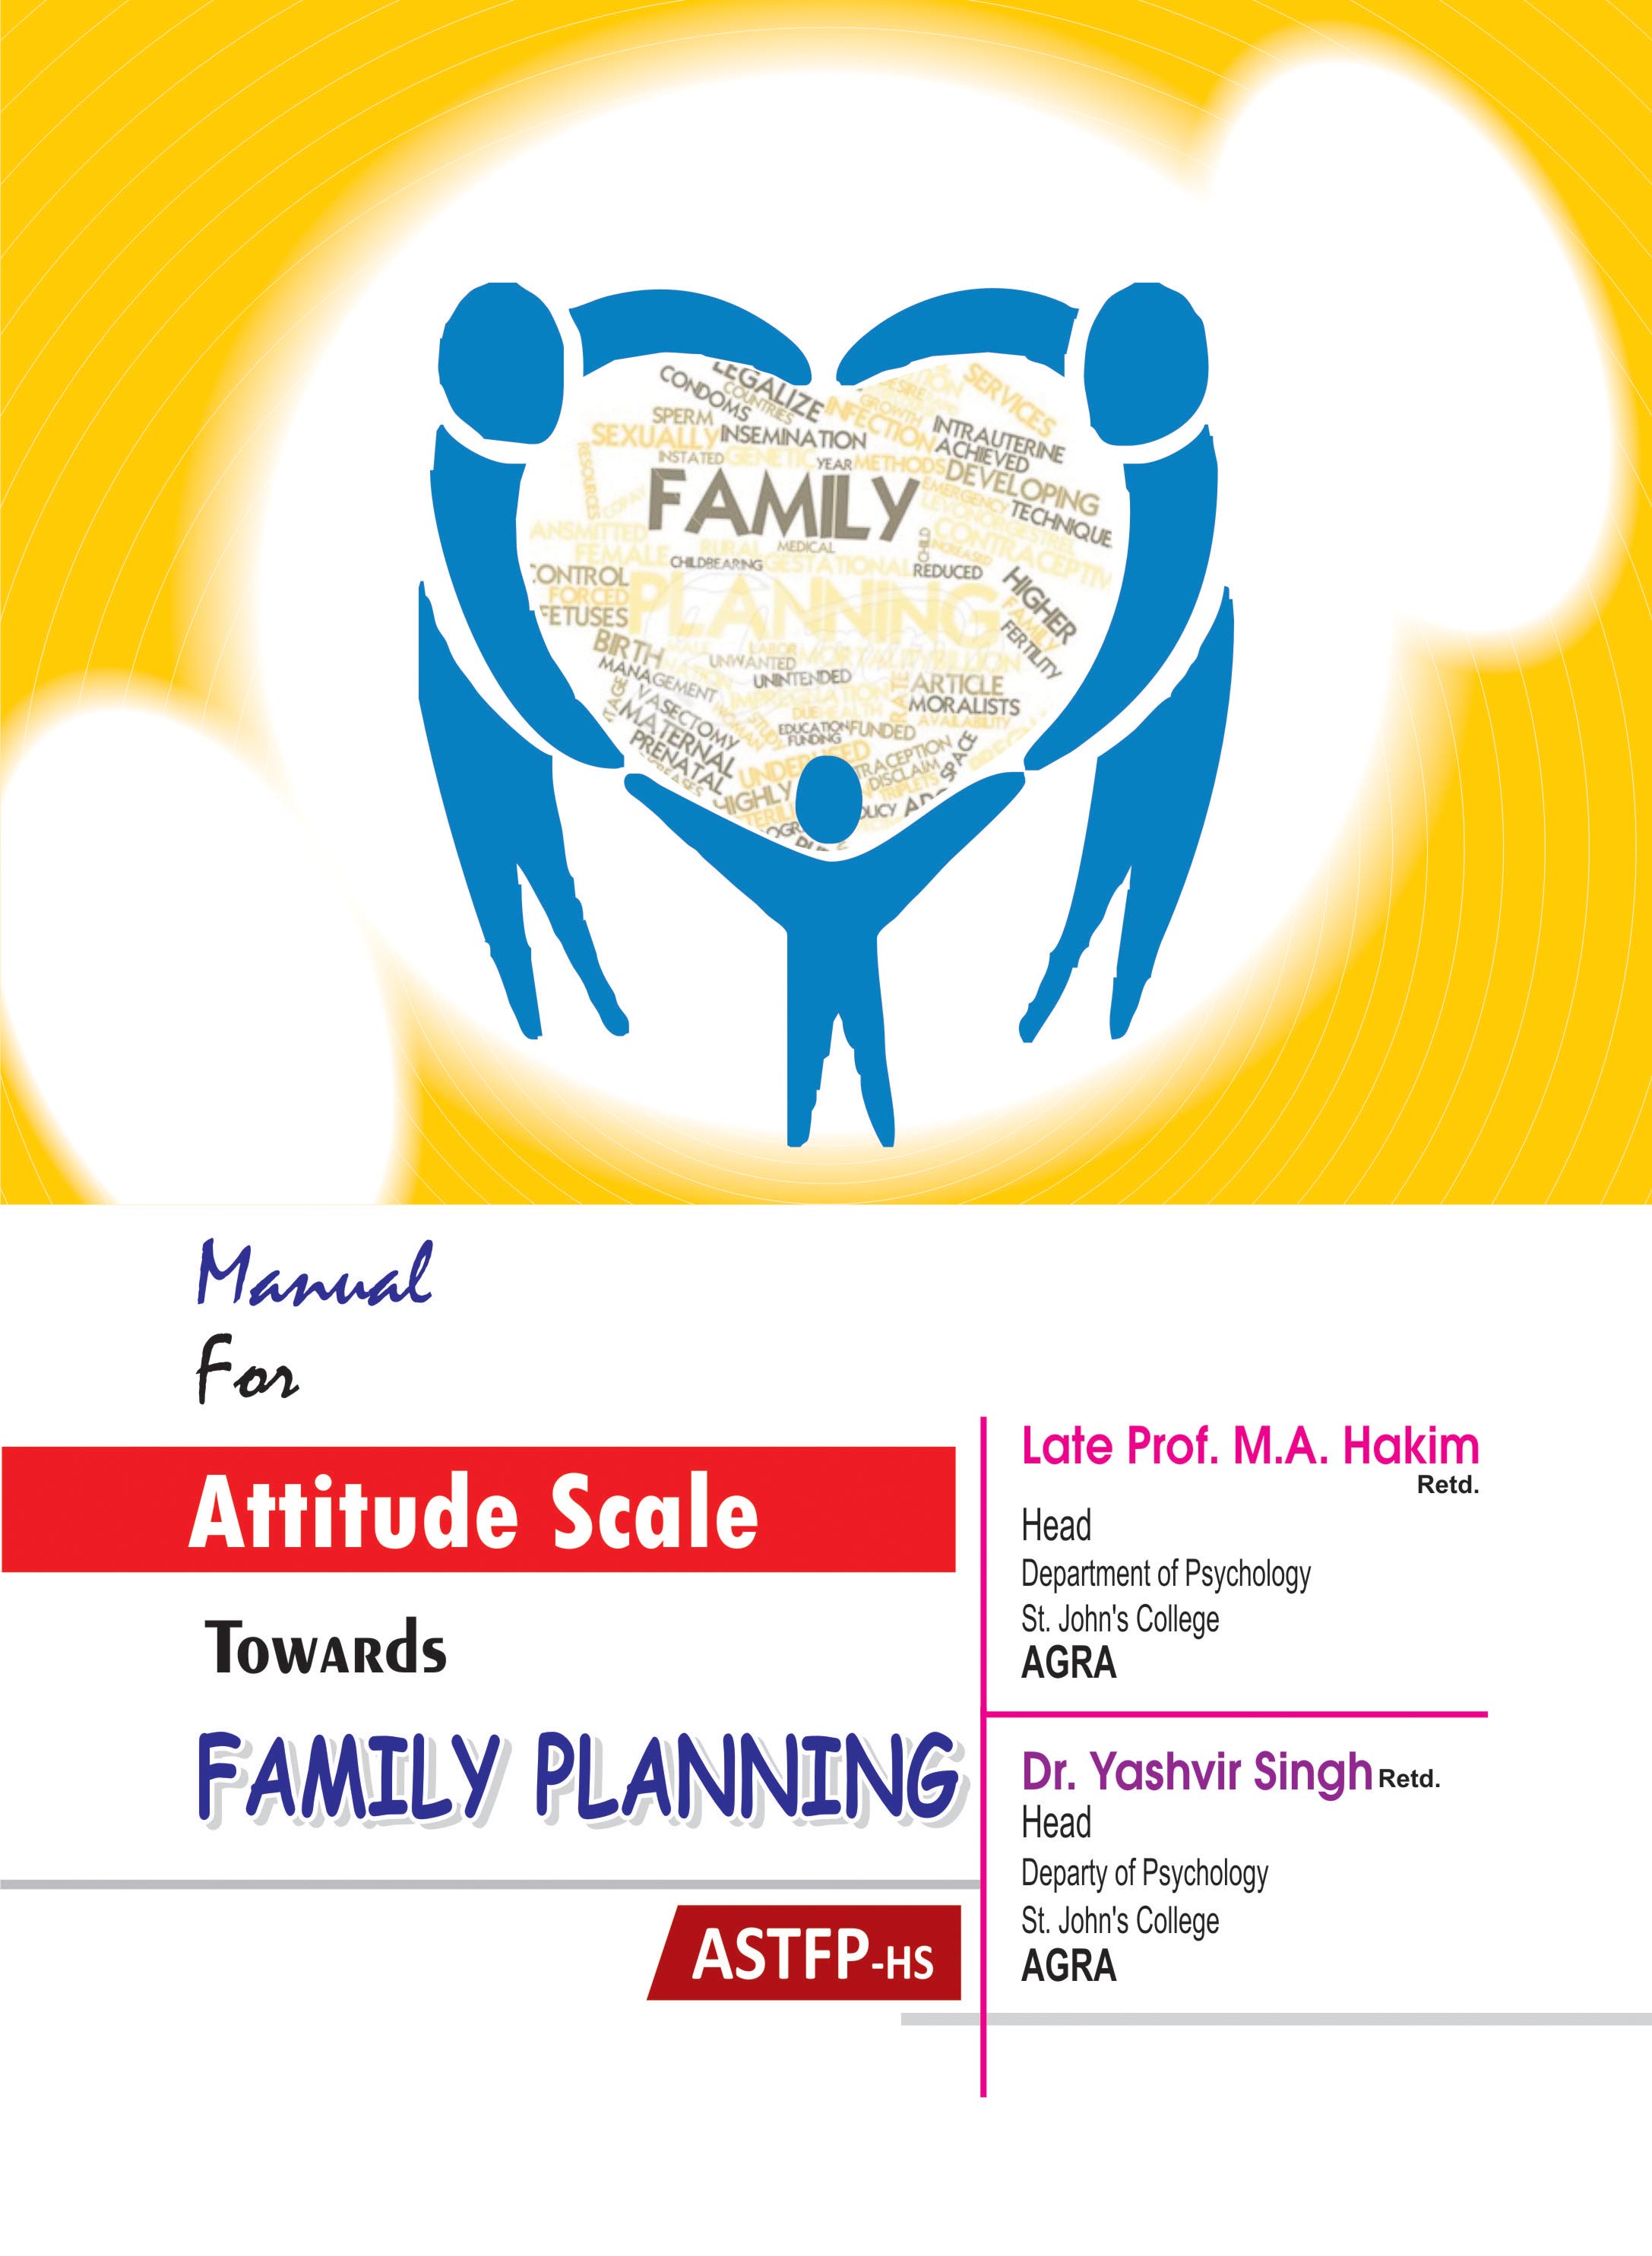 The Uttar Pradesh man behind the ubiquitous 'red pyramid' logo of family  planning